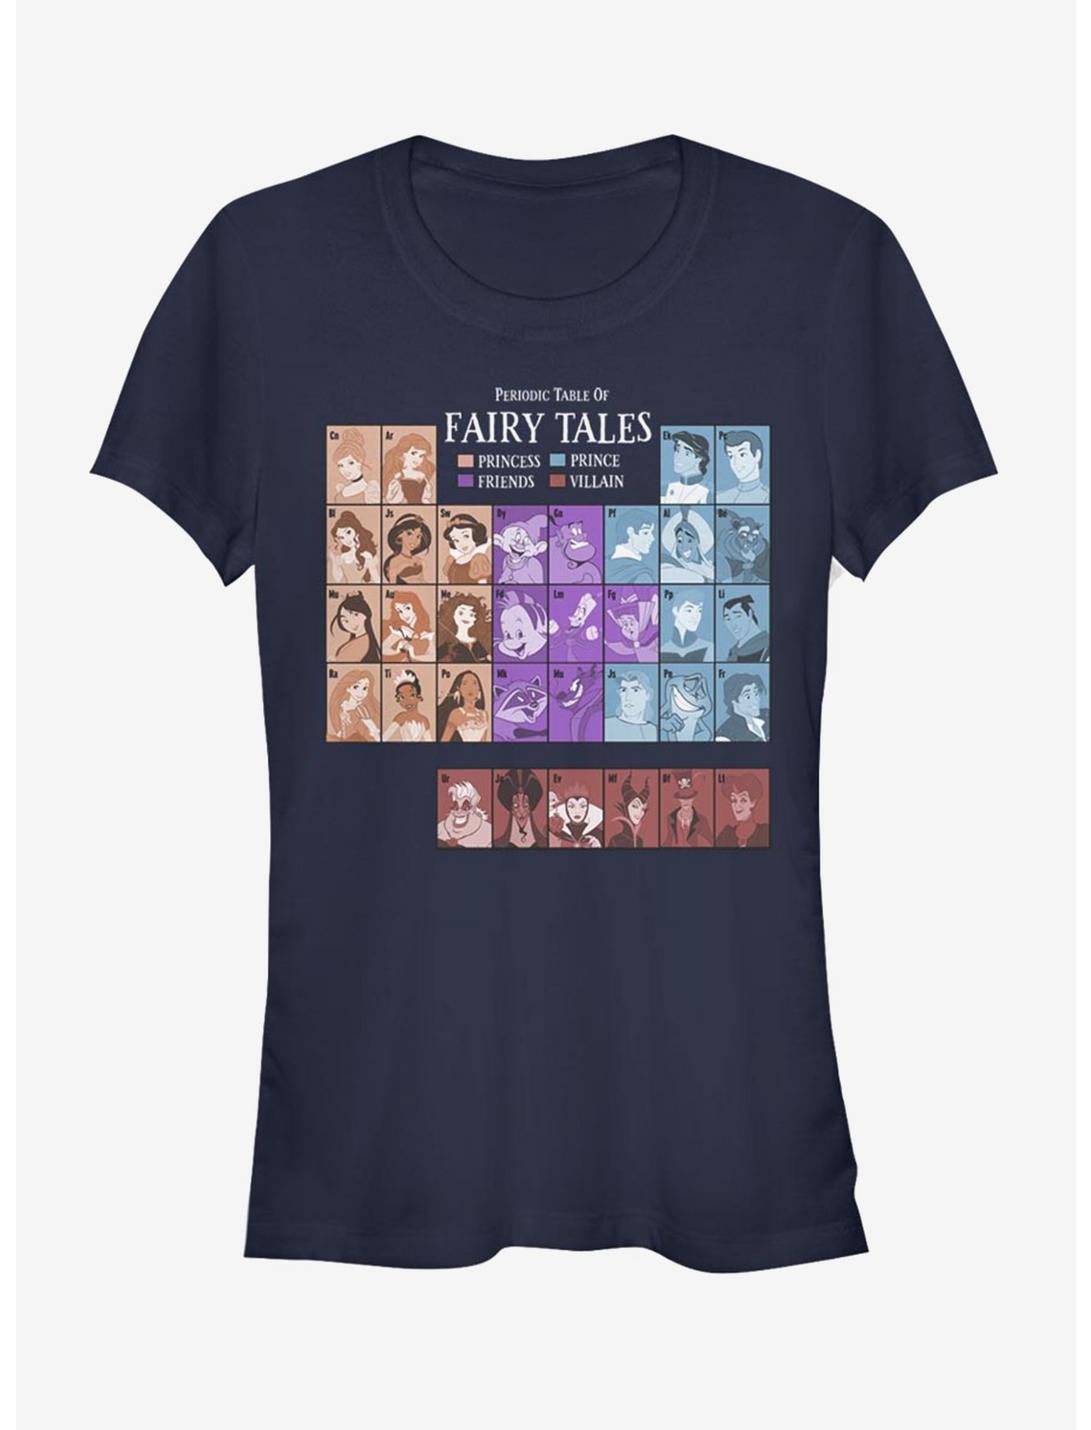 Disney Characters Periodic Table Of Fairy Tales Girls T-Shirt, NAVY, hi-res